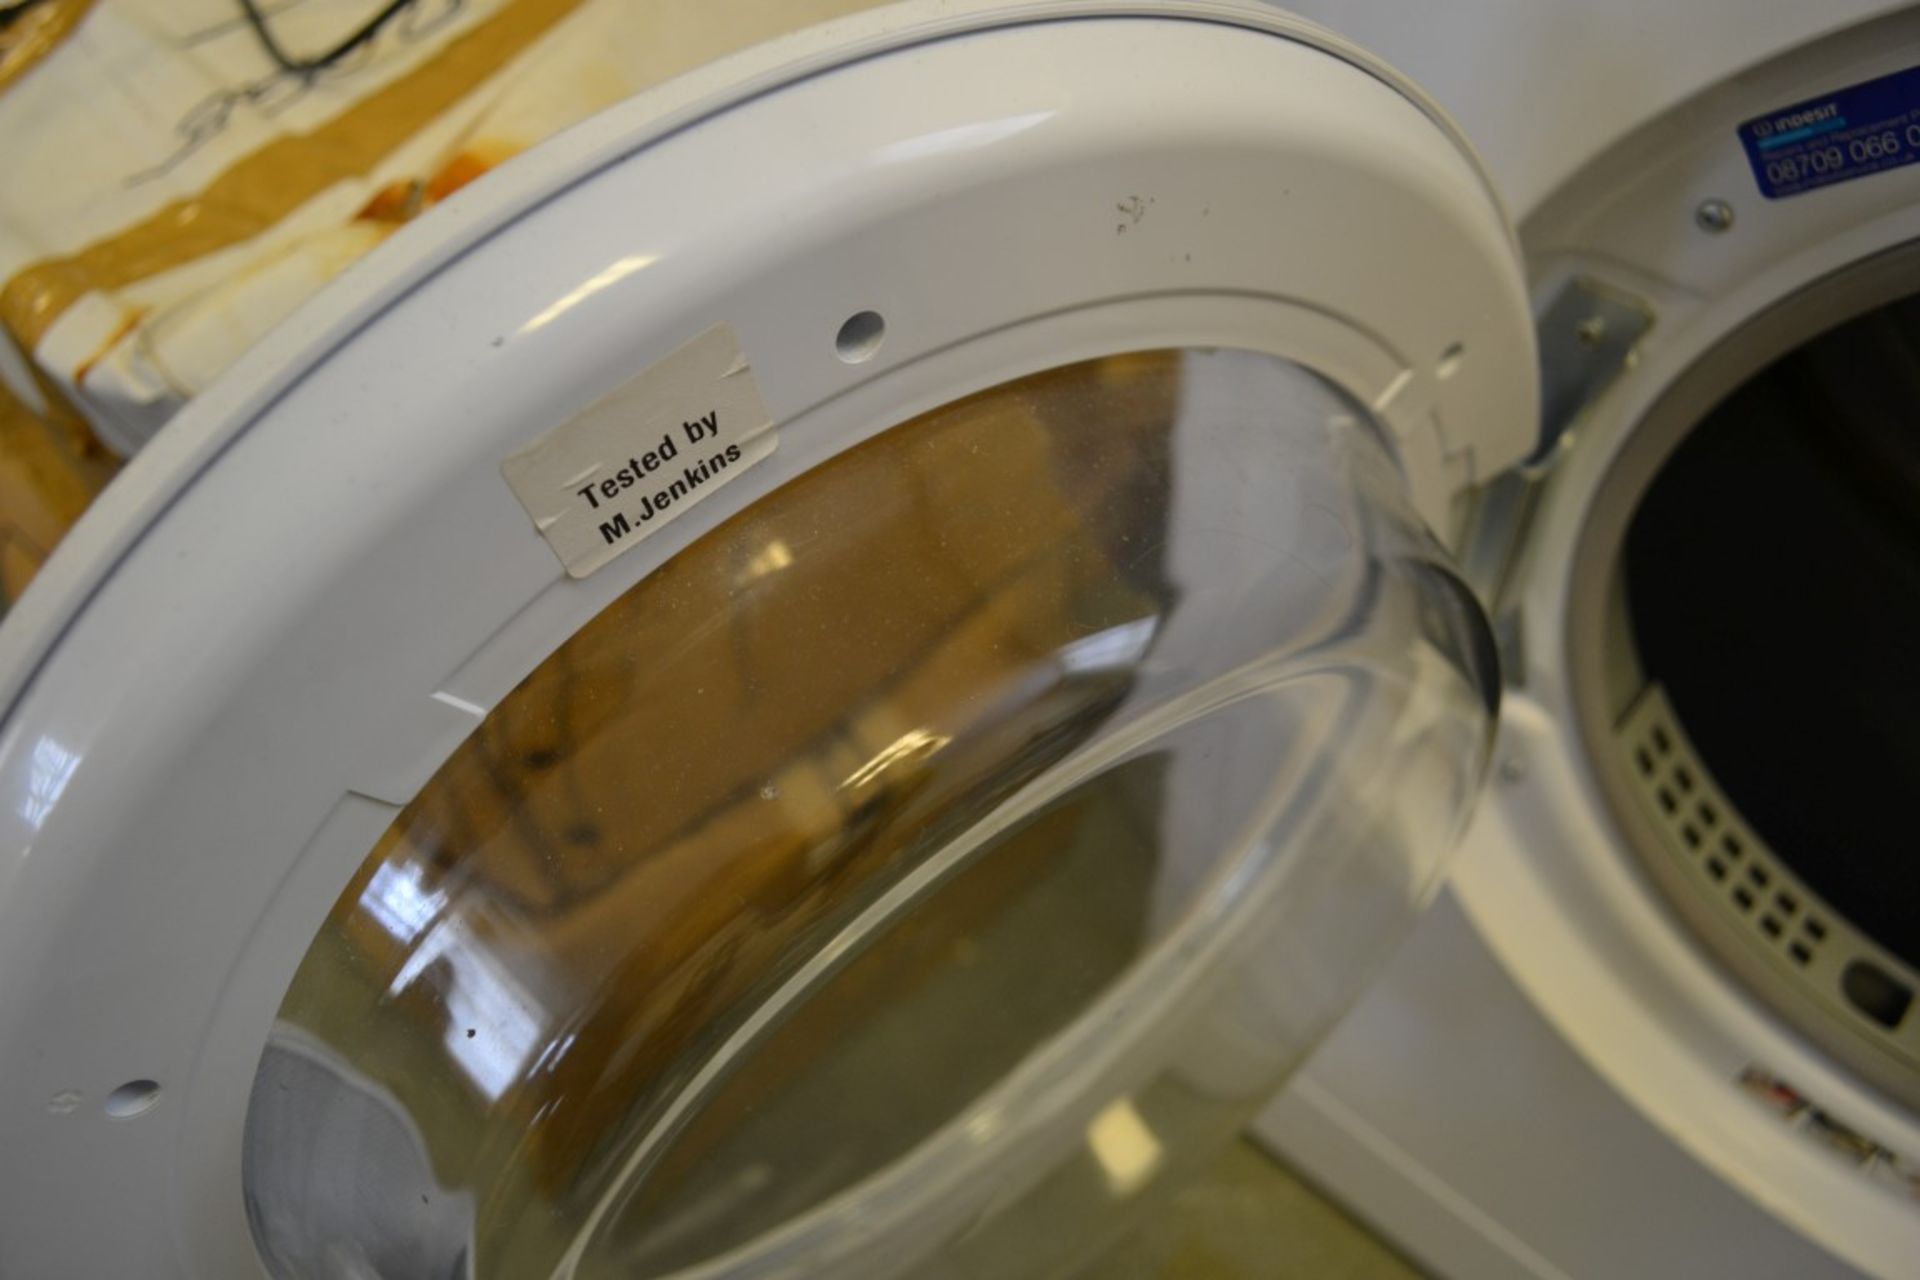 1 x Indesit Tumble Dryer (ModeL: IS60 VU) - From A Clean Manor House Environment In Good Working - Image 5 of 6